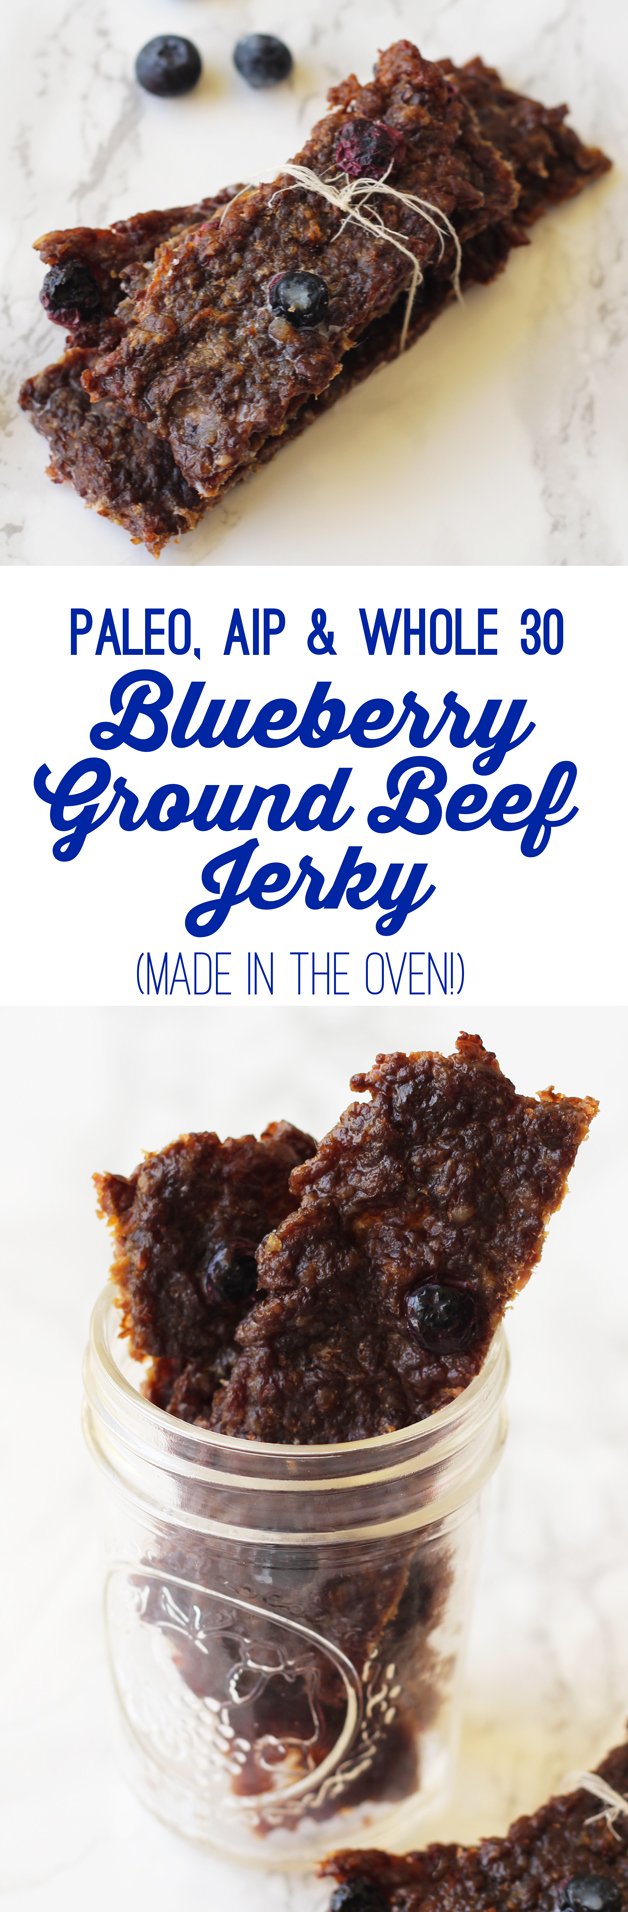 Blueberry Beef Jerky Made in The Oven with Ground Beef (Paleo, AIP, Whole 30)